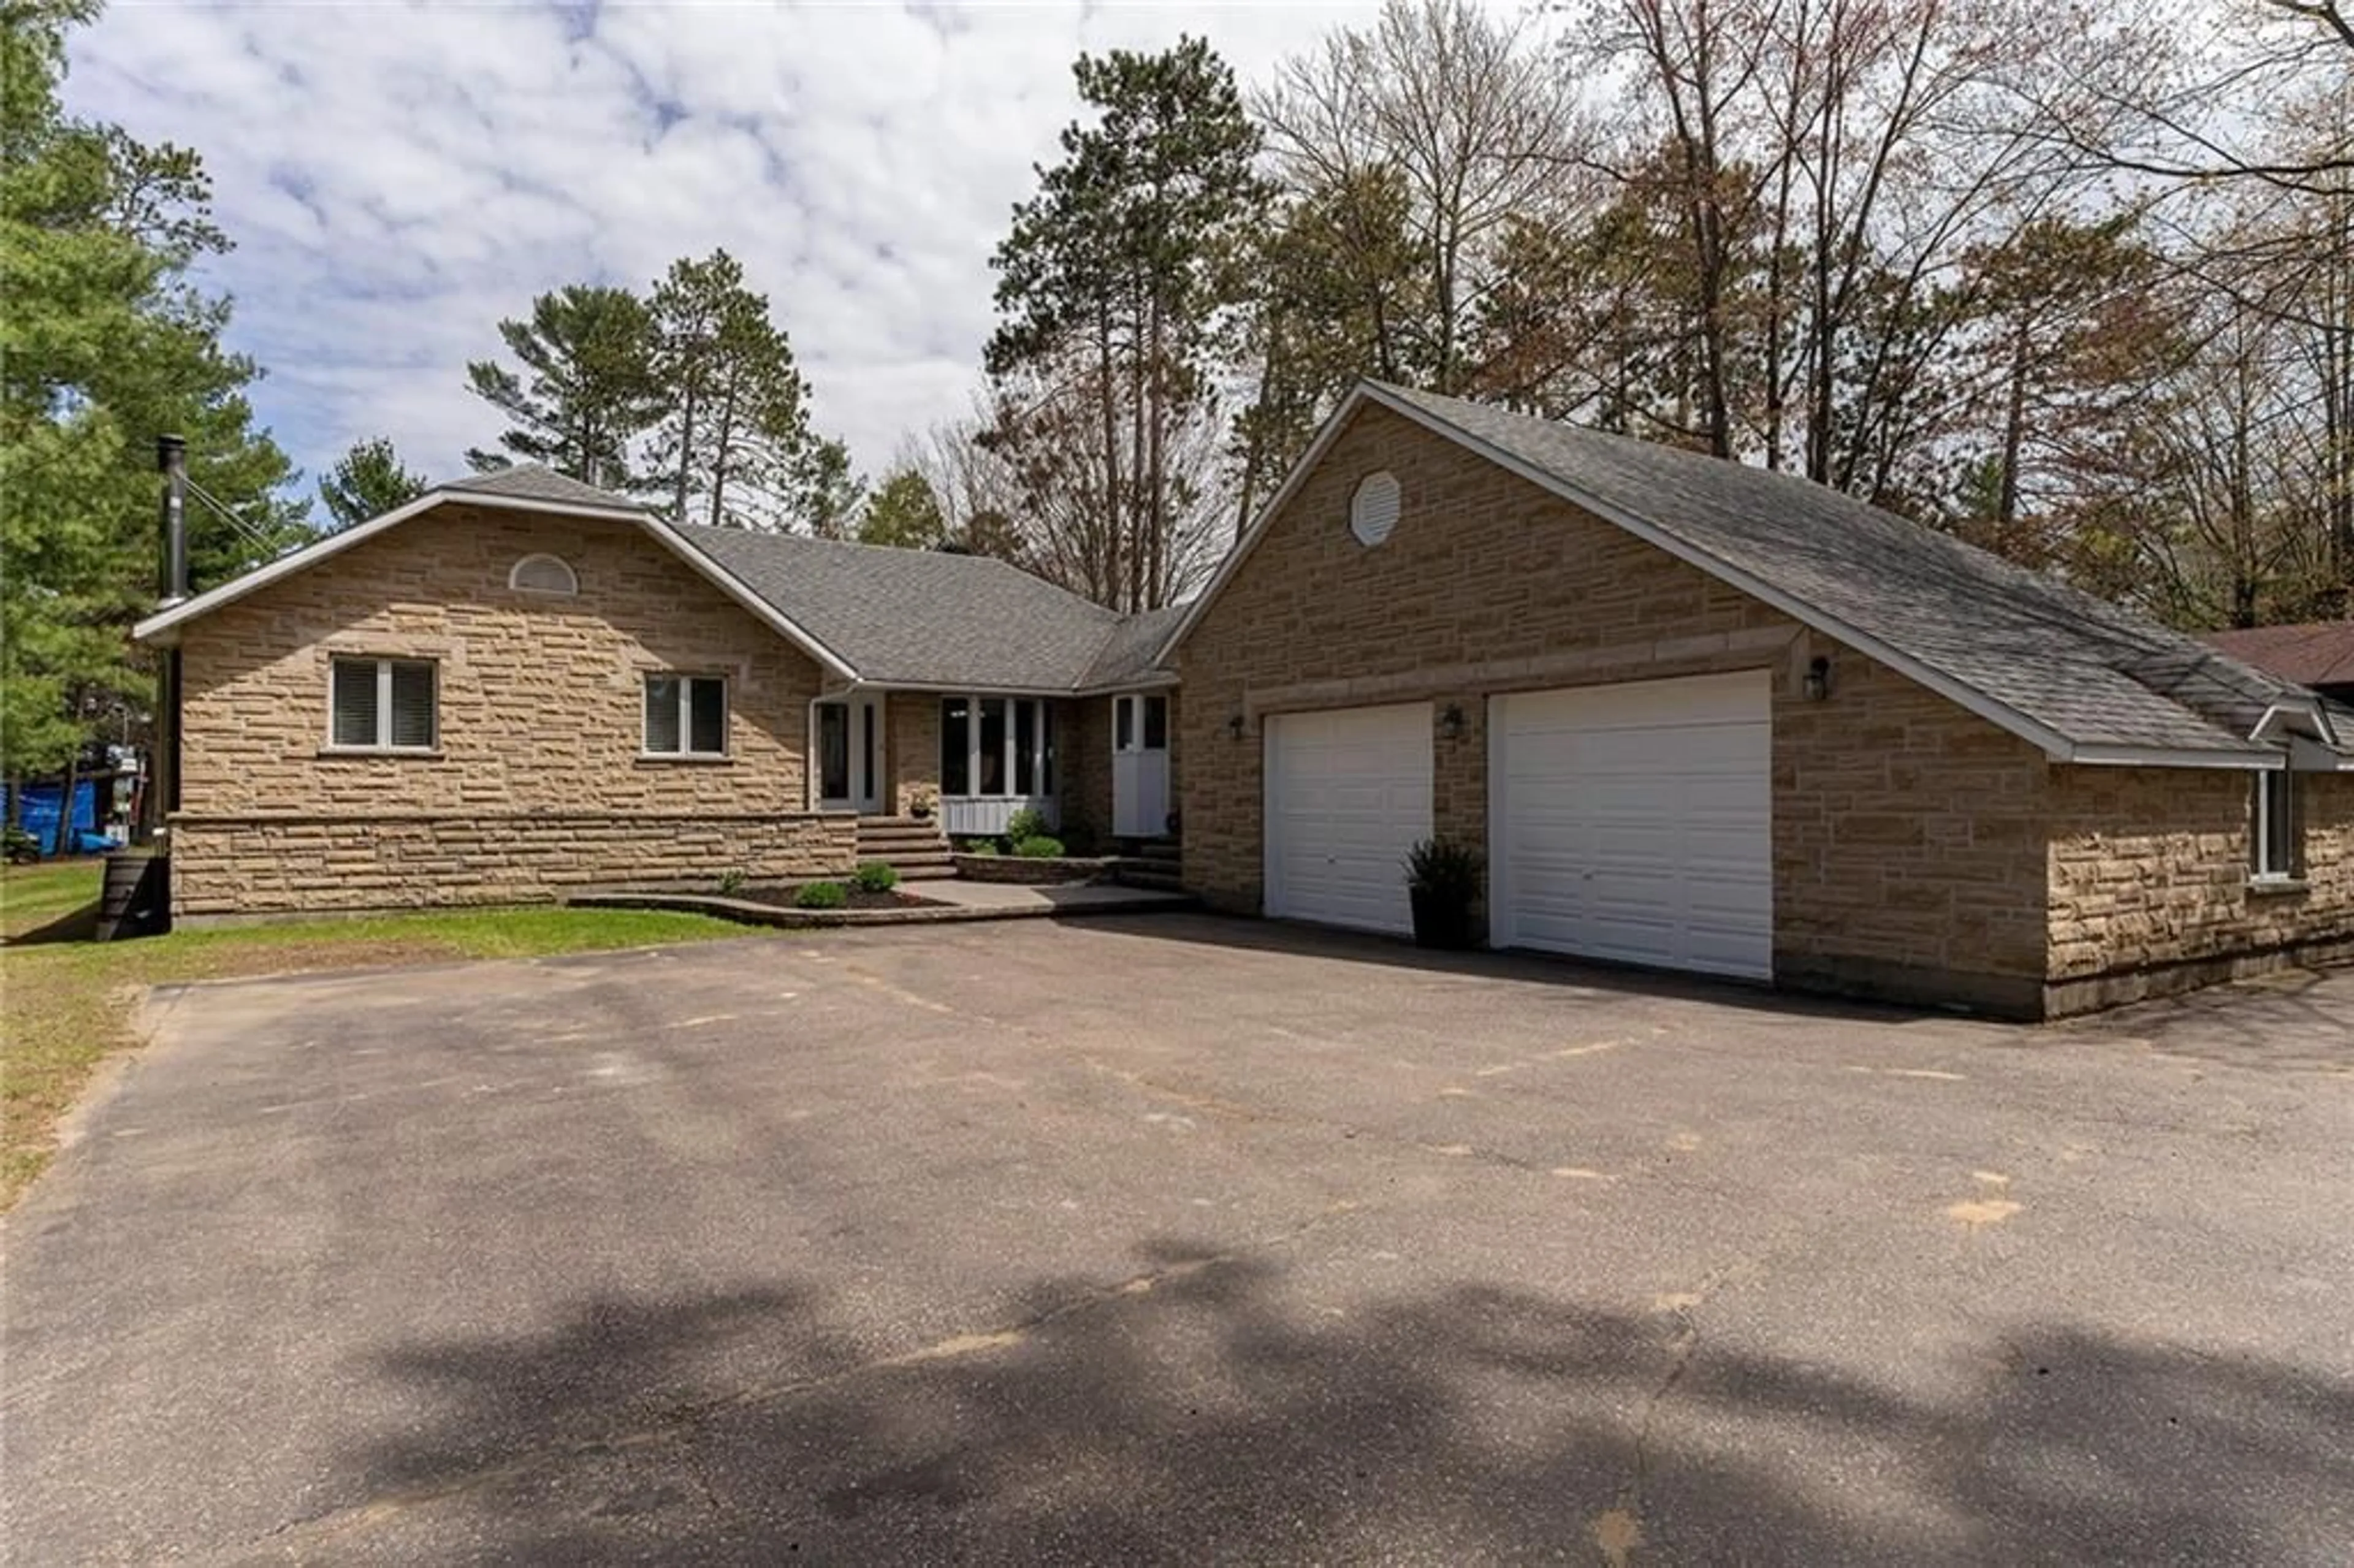 Outside view for 39 SELLEY St, Petawawa Ontario K8H 3G9